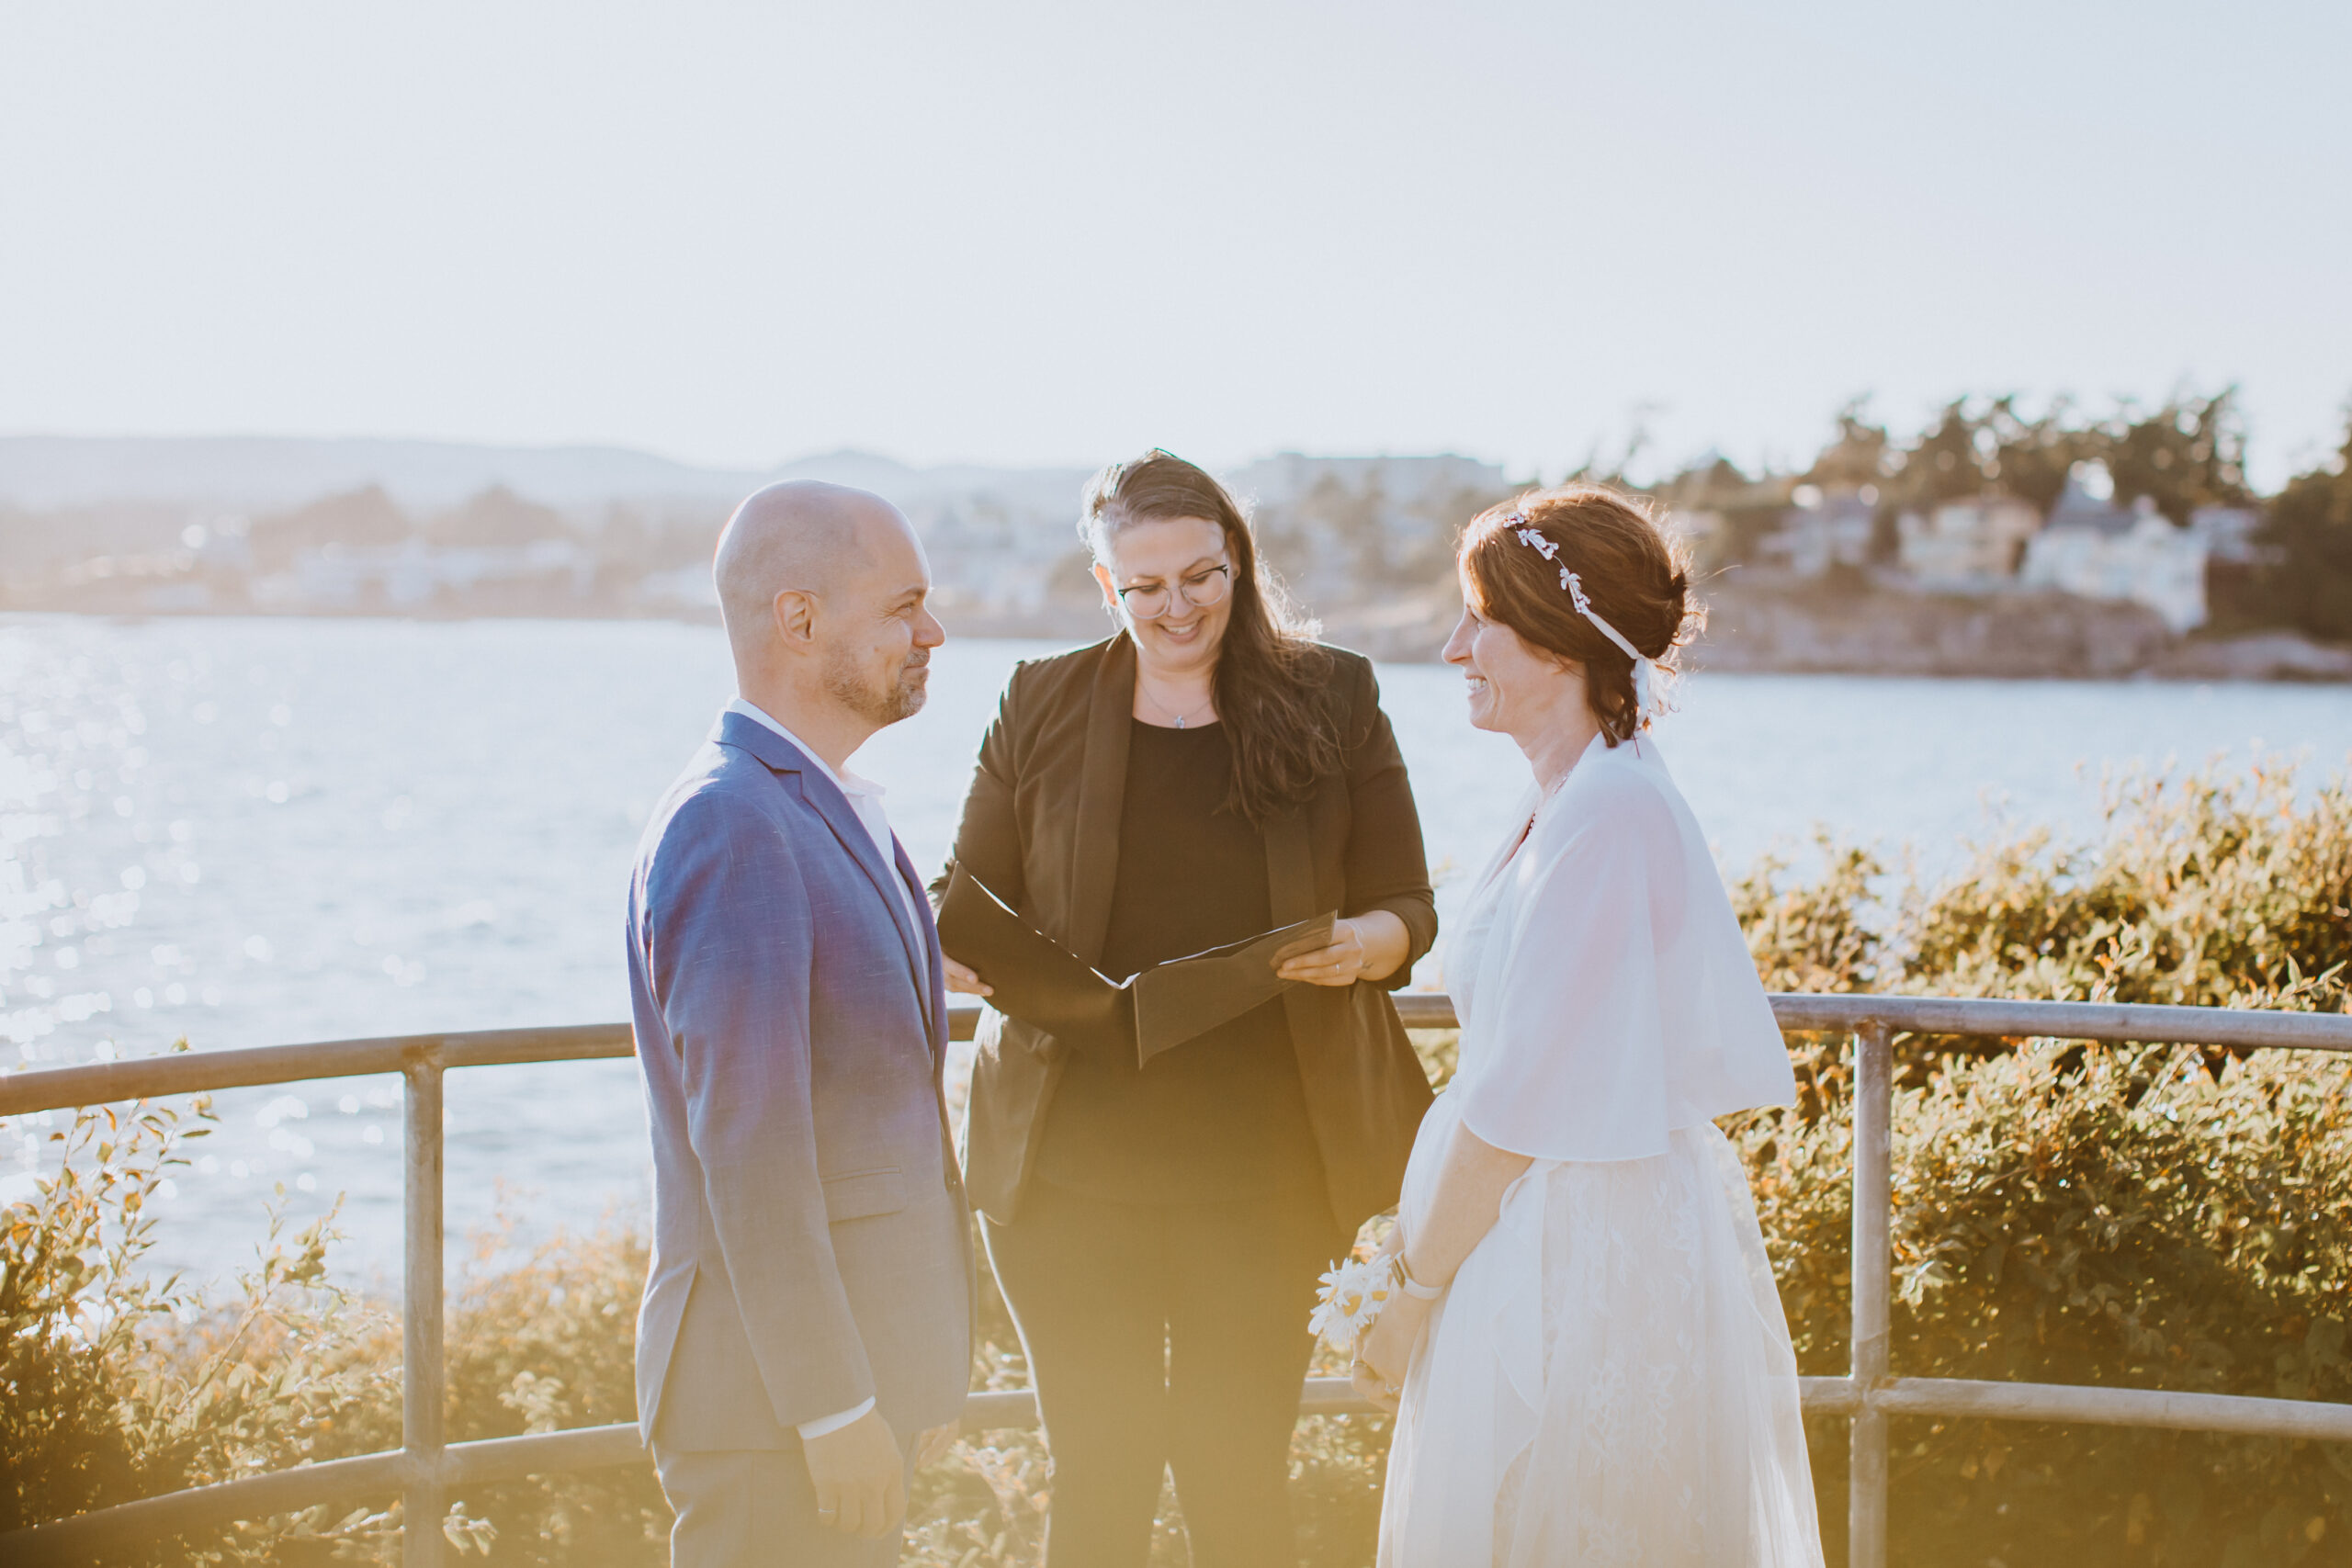 where does the officiant stand during a wedding ceremony, young hip and married victoria wedding